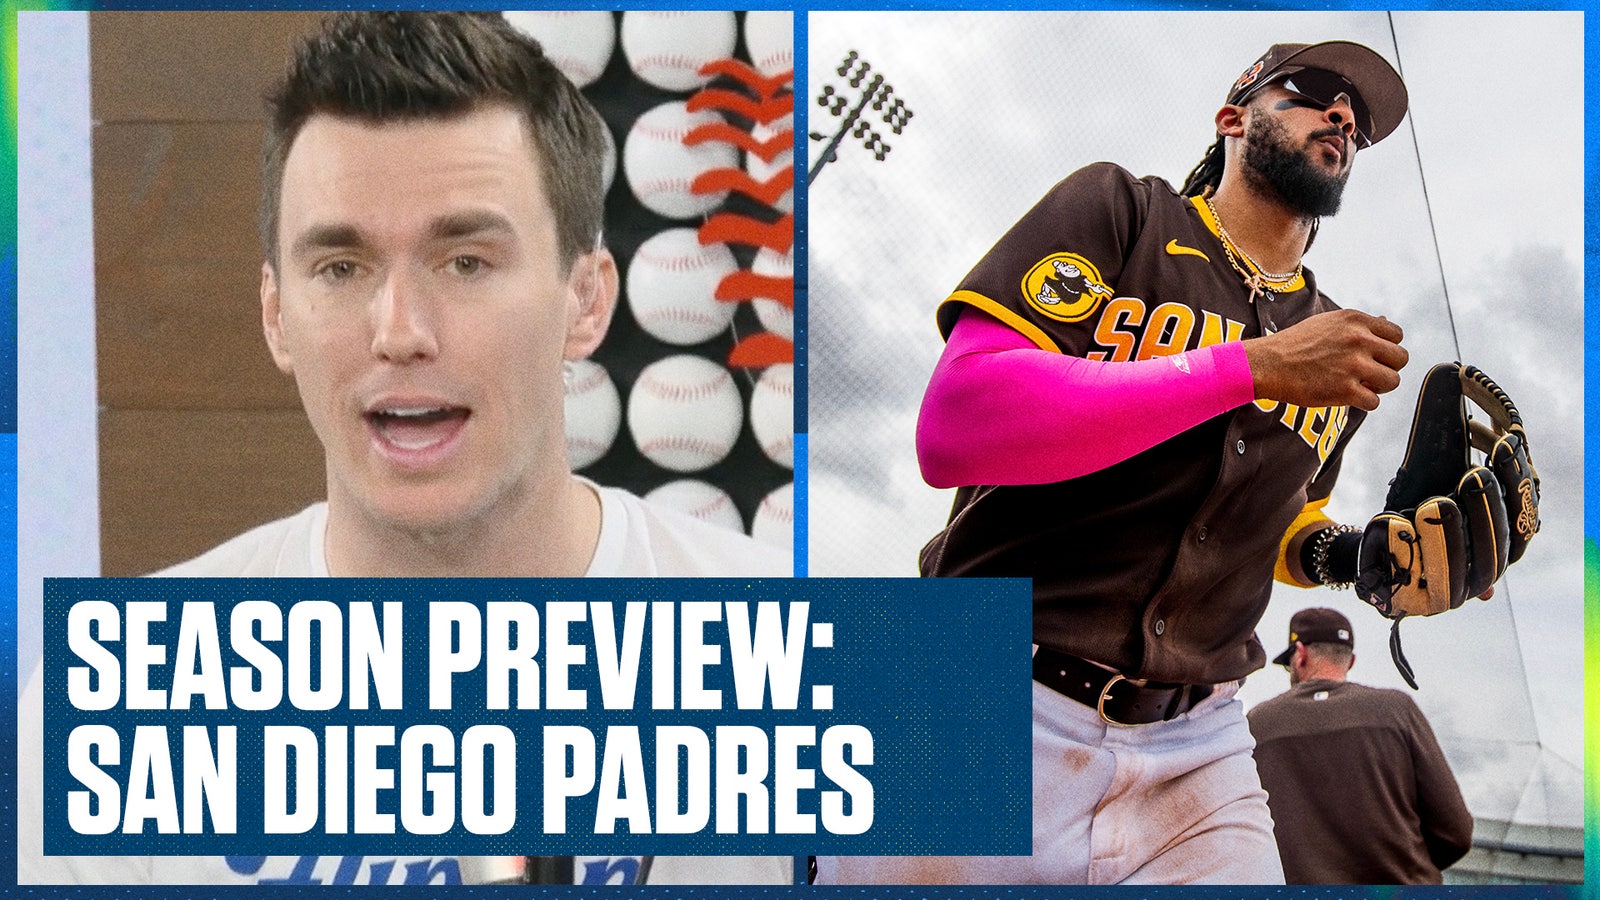 San Diego Padres Season Preview: Can they overtake the Los Angeles Dodgers as King